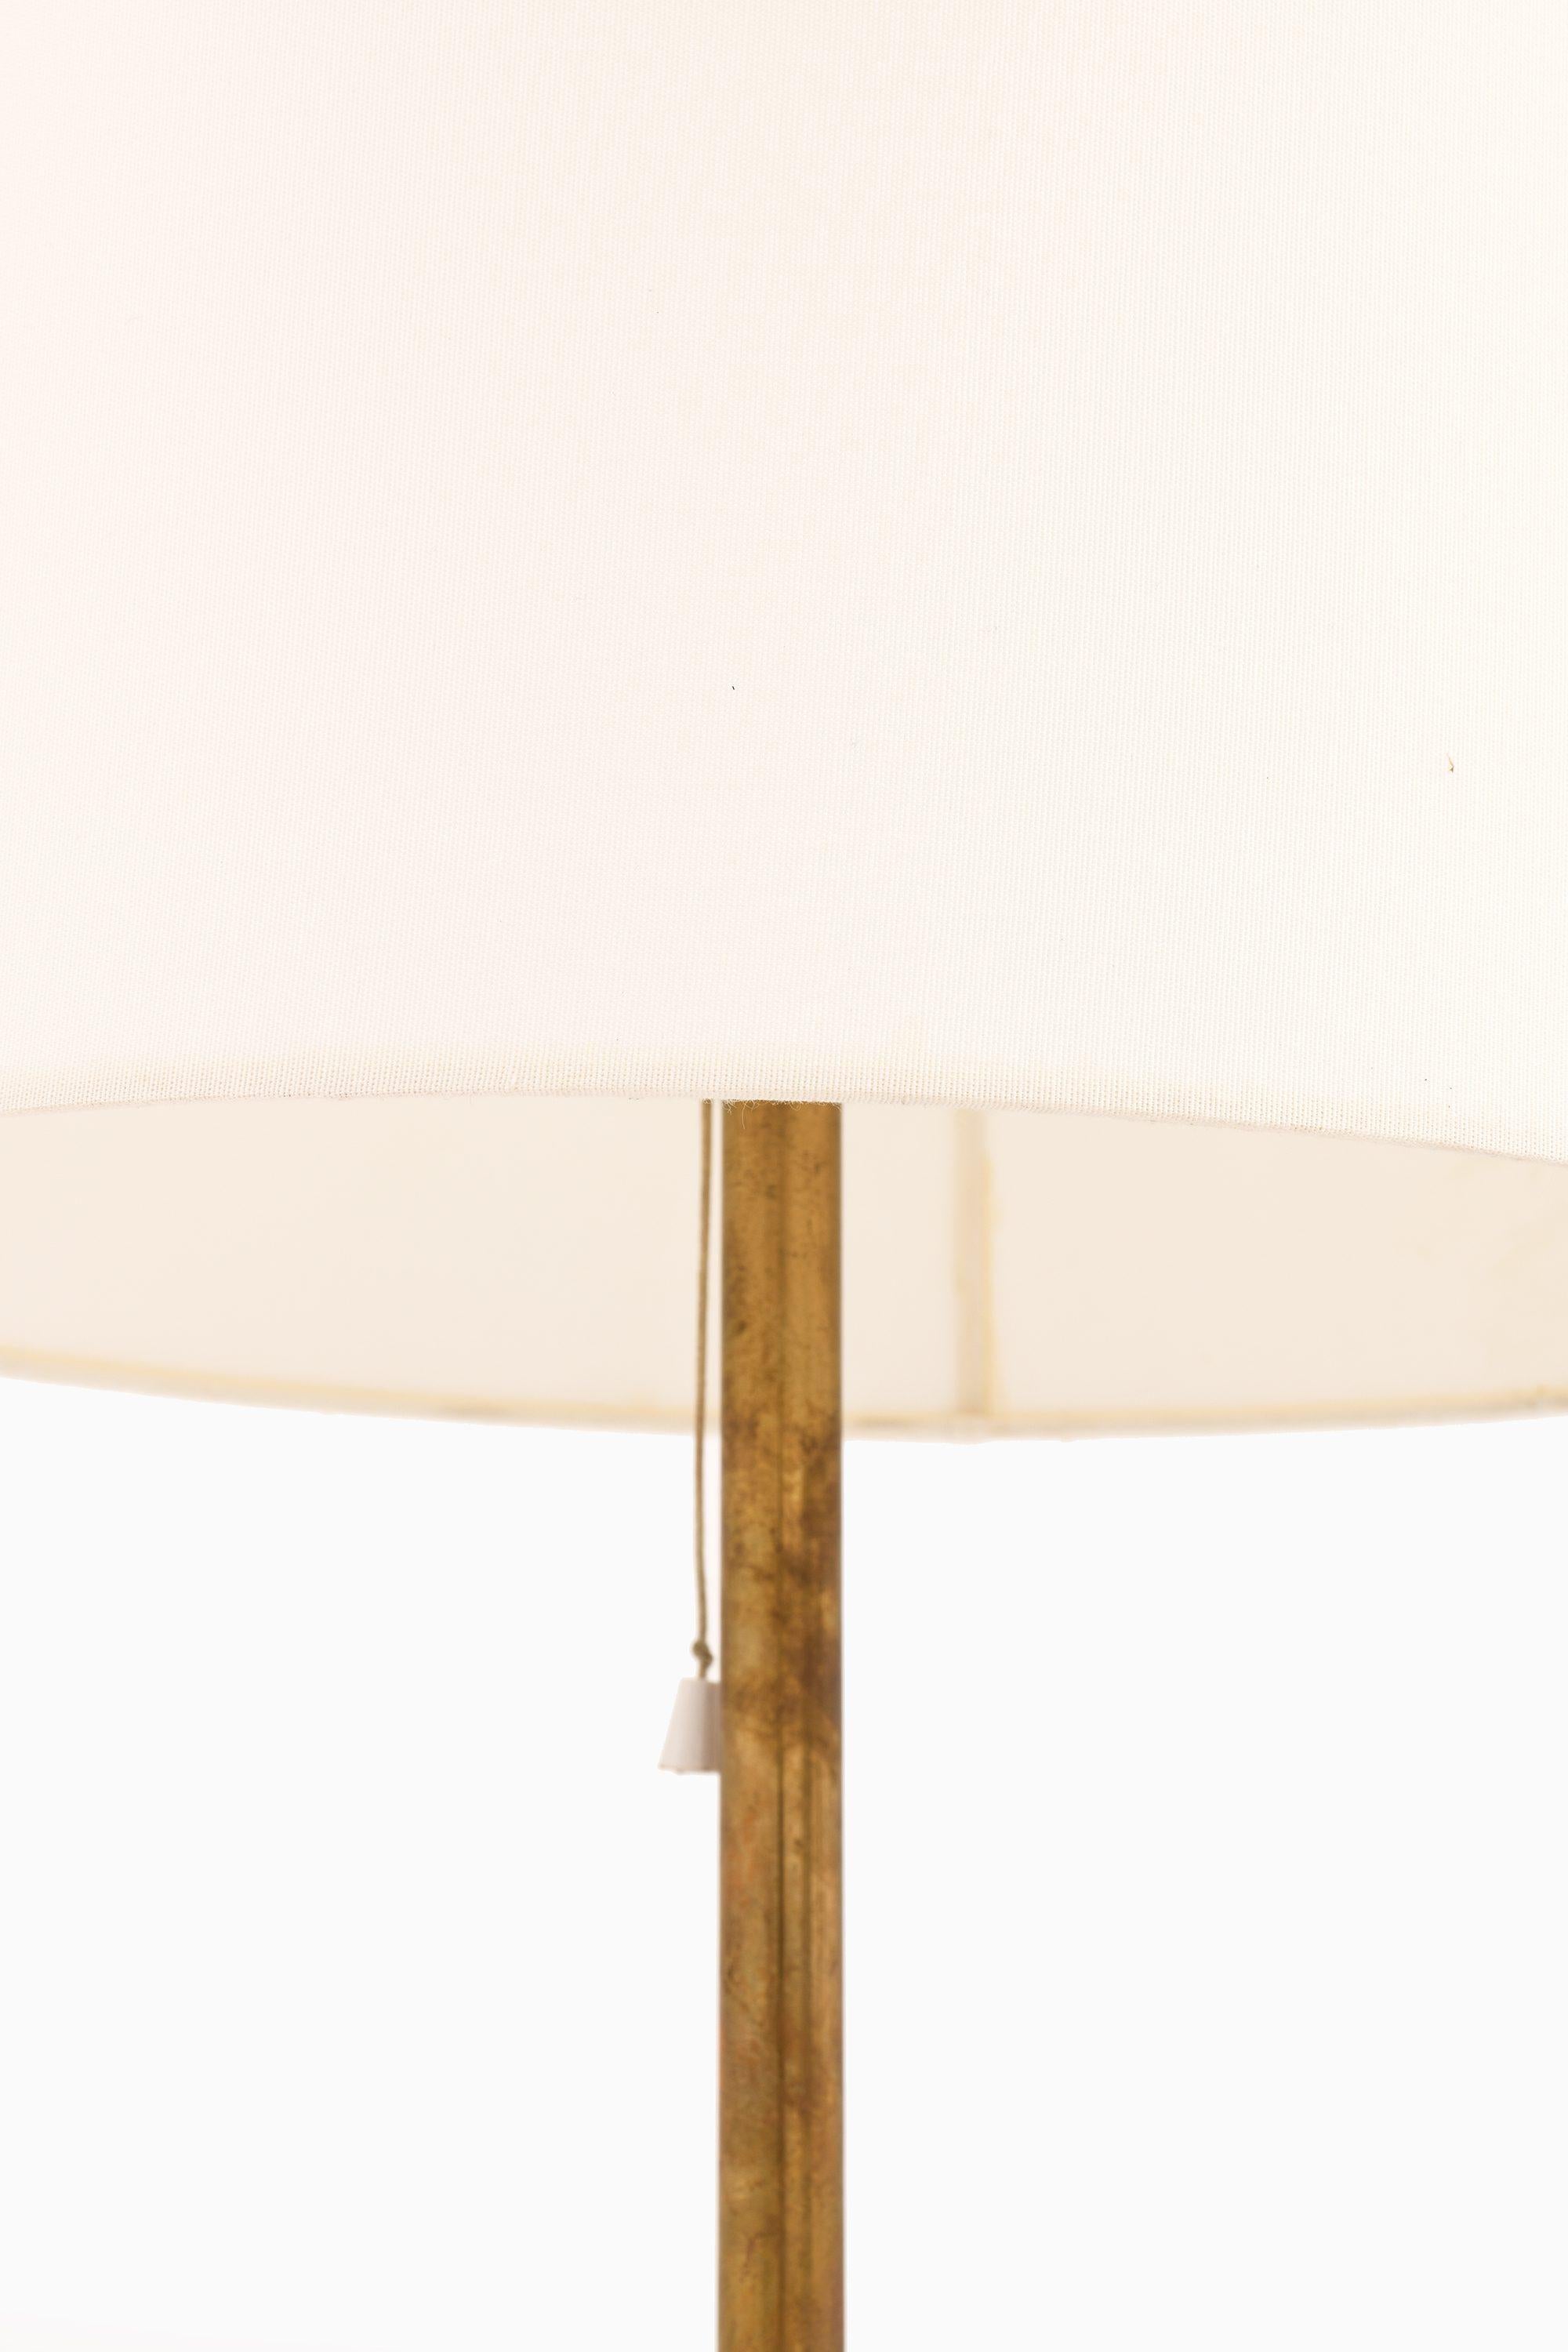 Scandinavian Modern Floor Lamp in Brass, Plastic and Fabric by Uno and Östen Kristiansson, 1960's For Sale